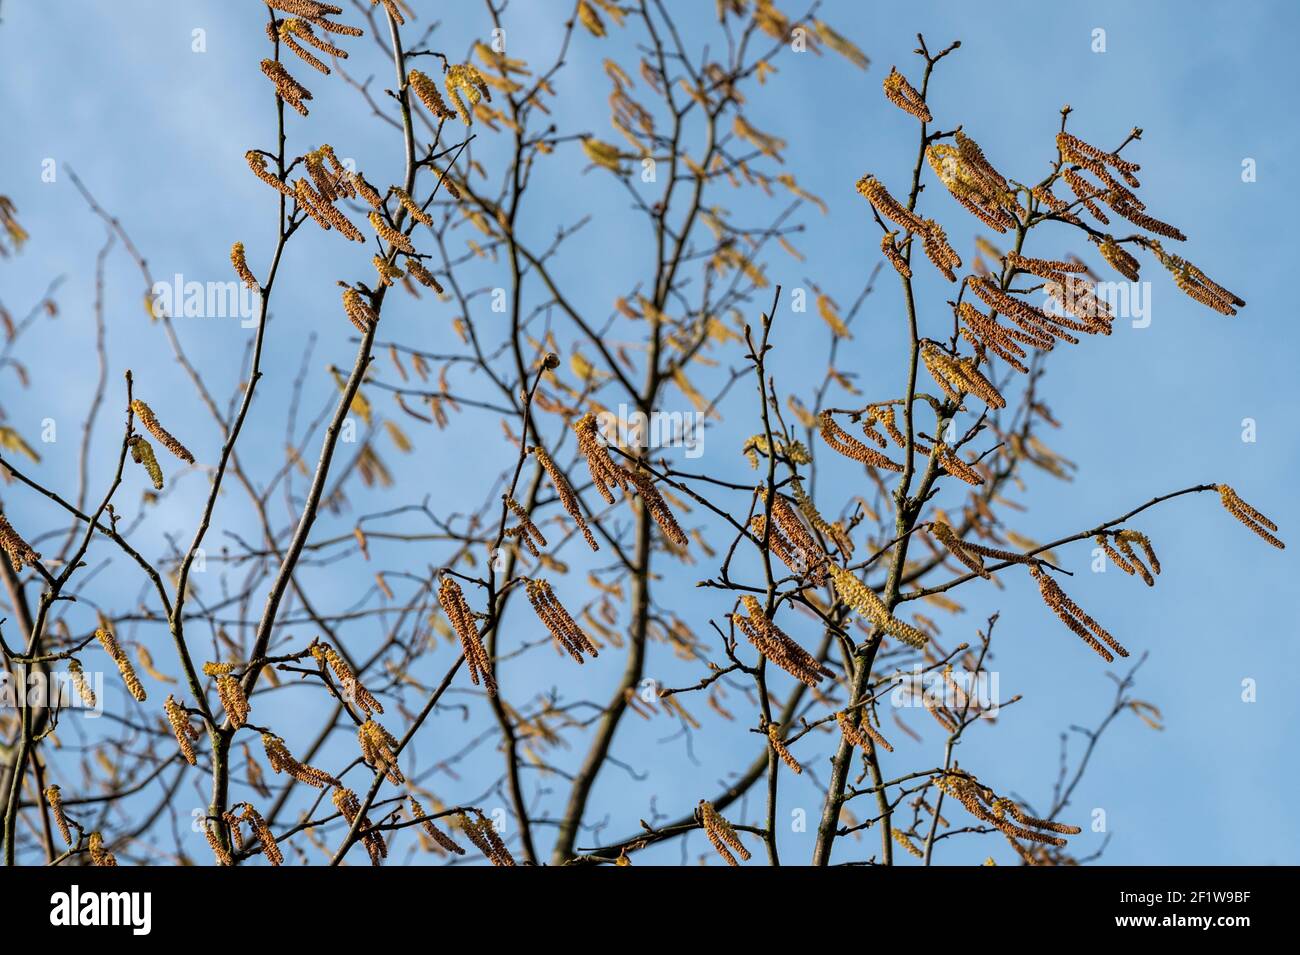 Hazel catkins (Corylus avellana) blowing in the wind in spring. UK. Stock Photo